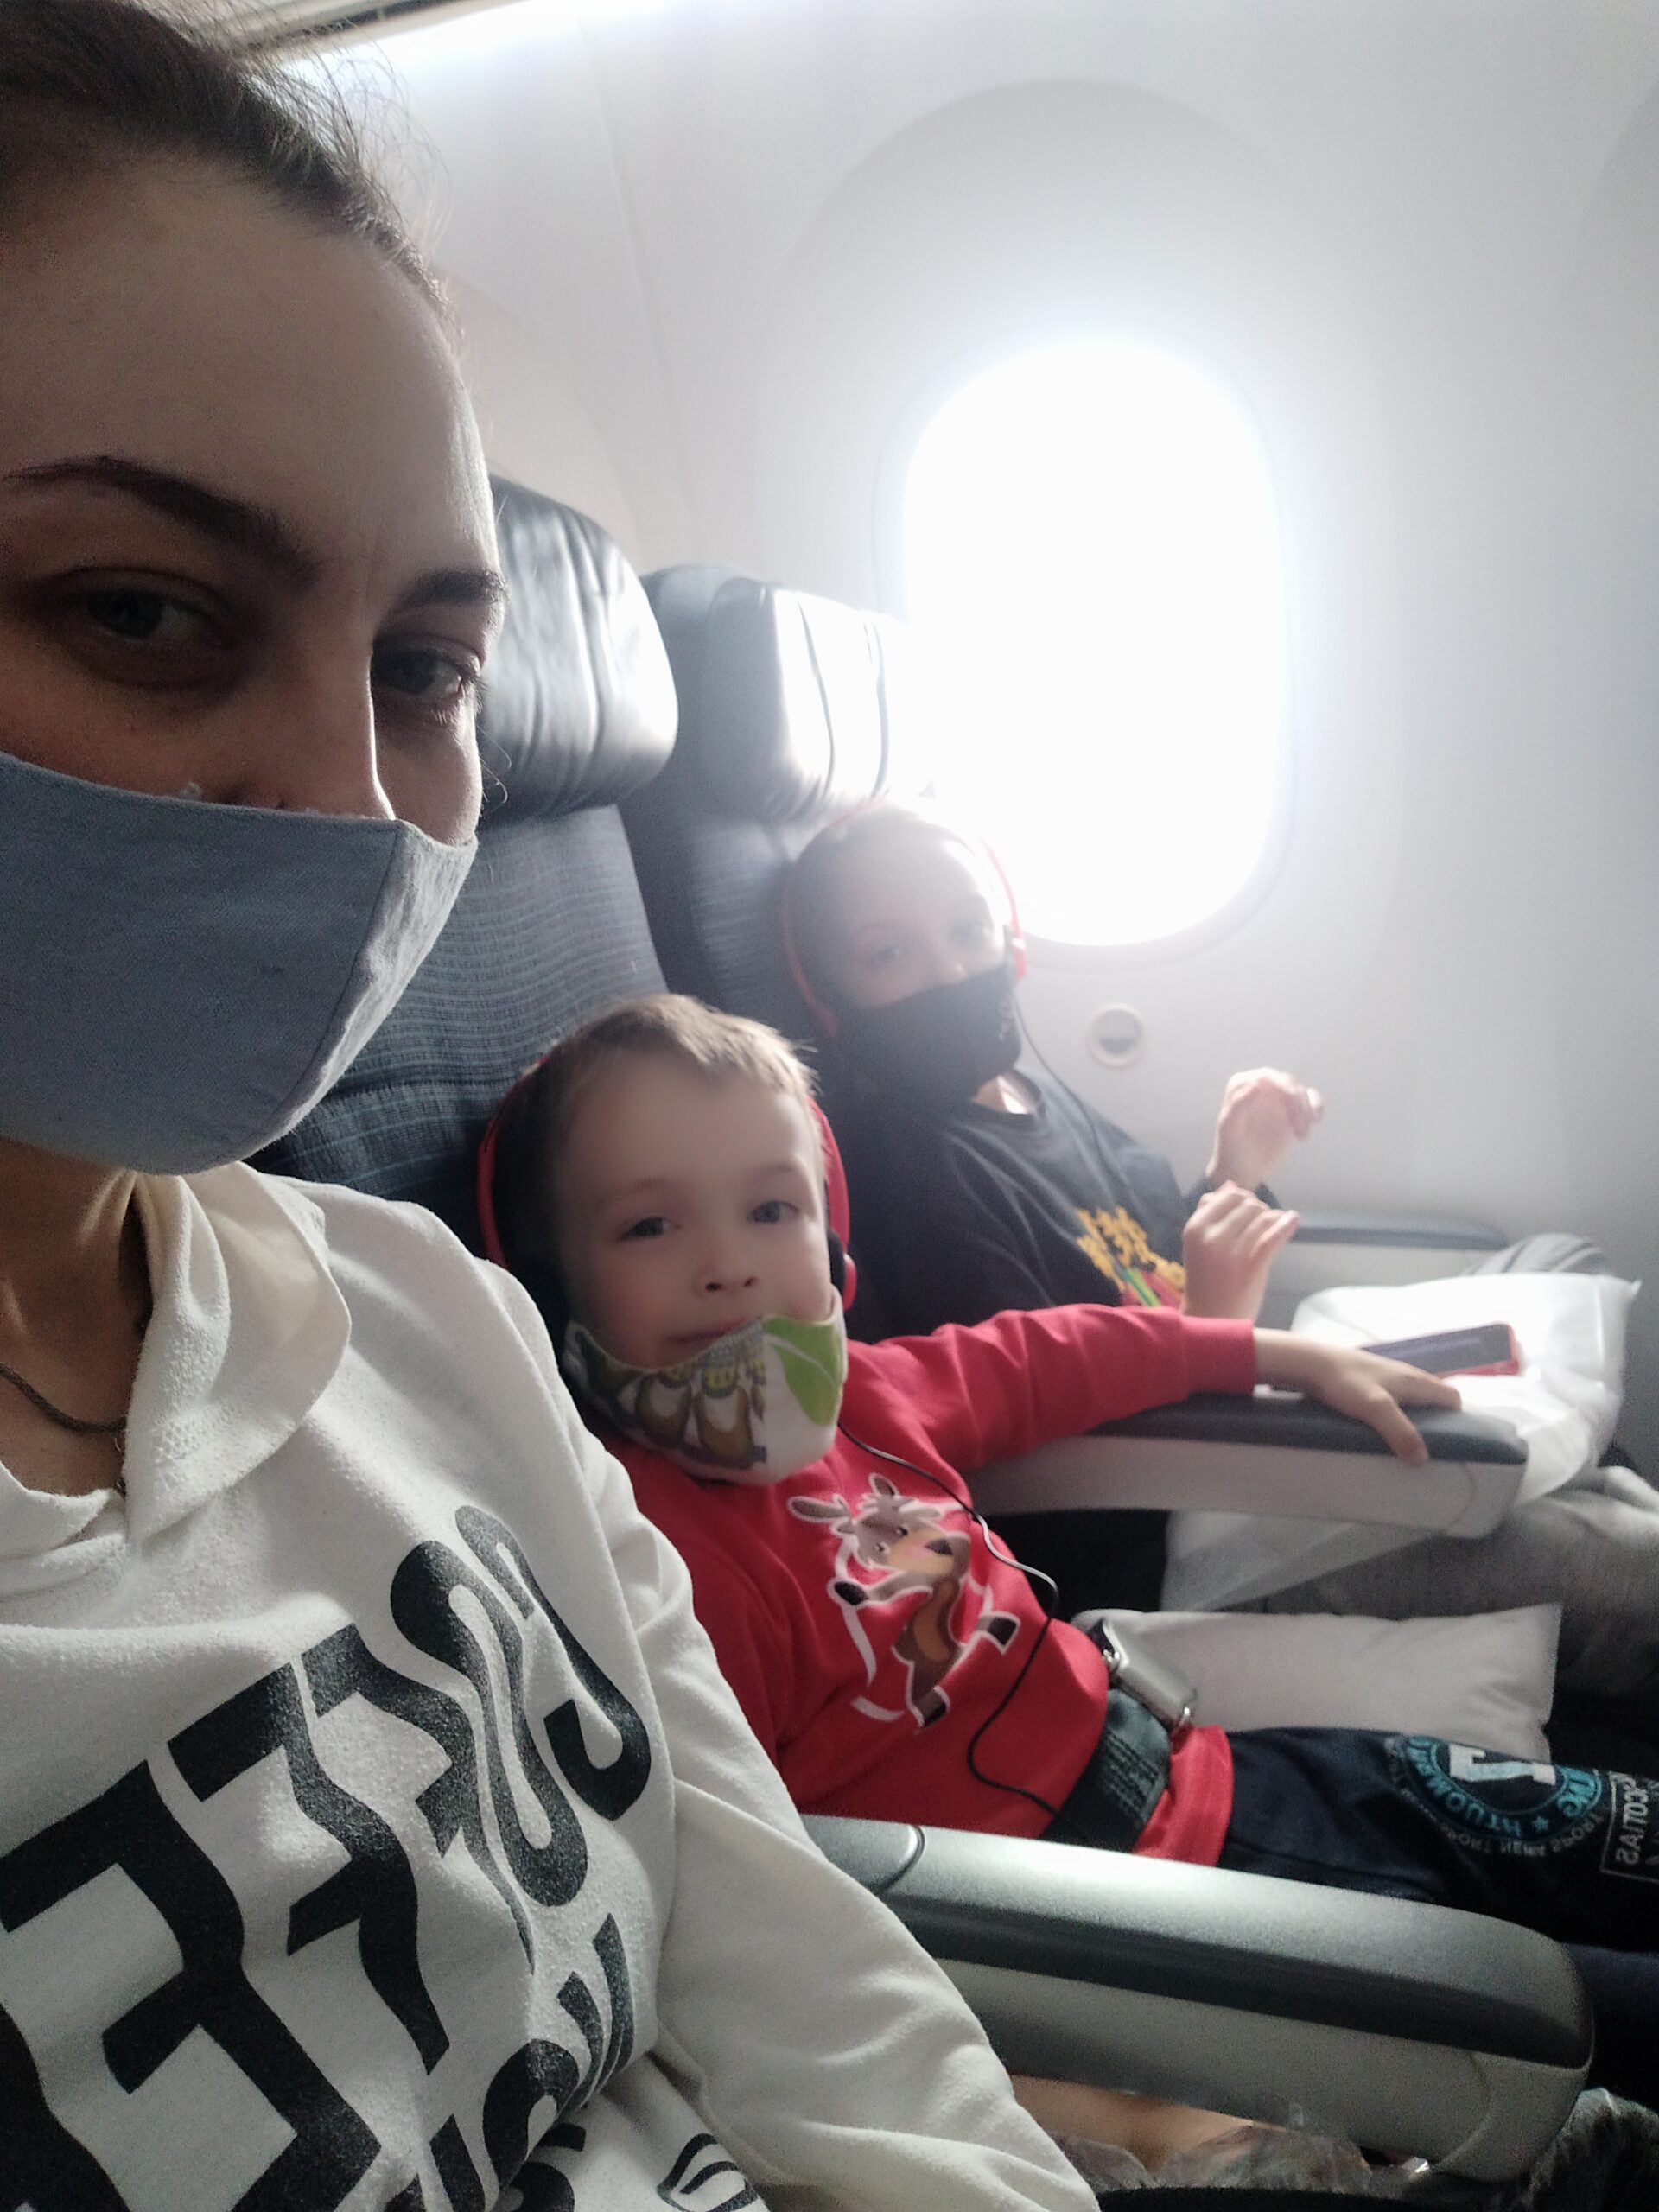 A woman sits with her two children on a plane.